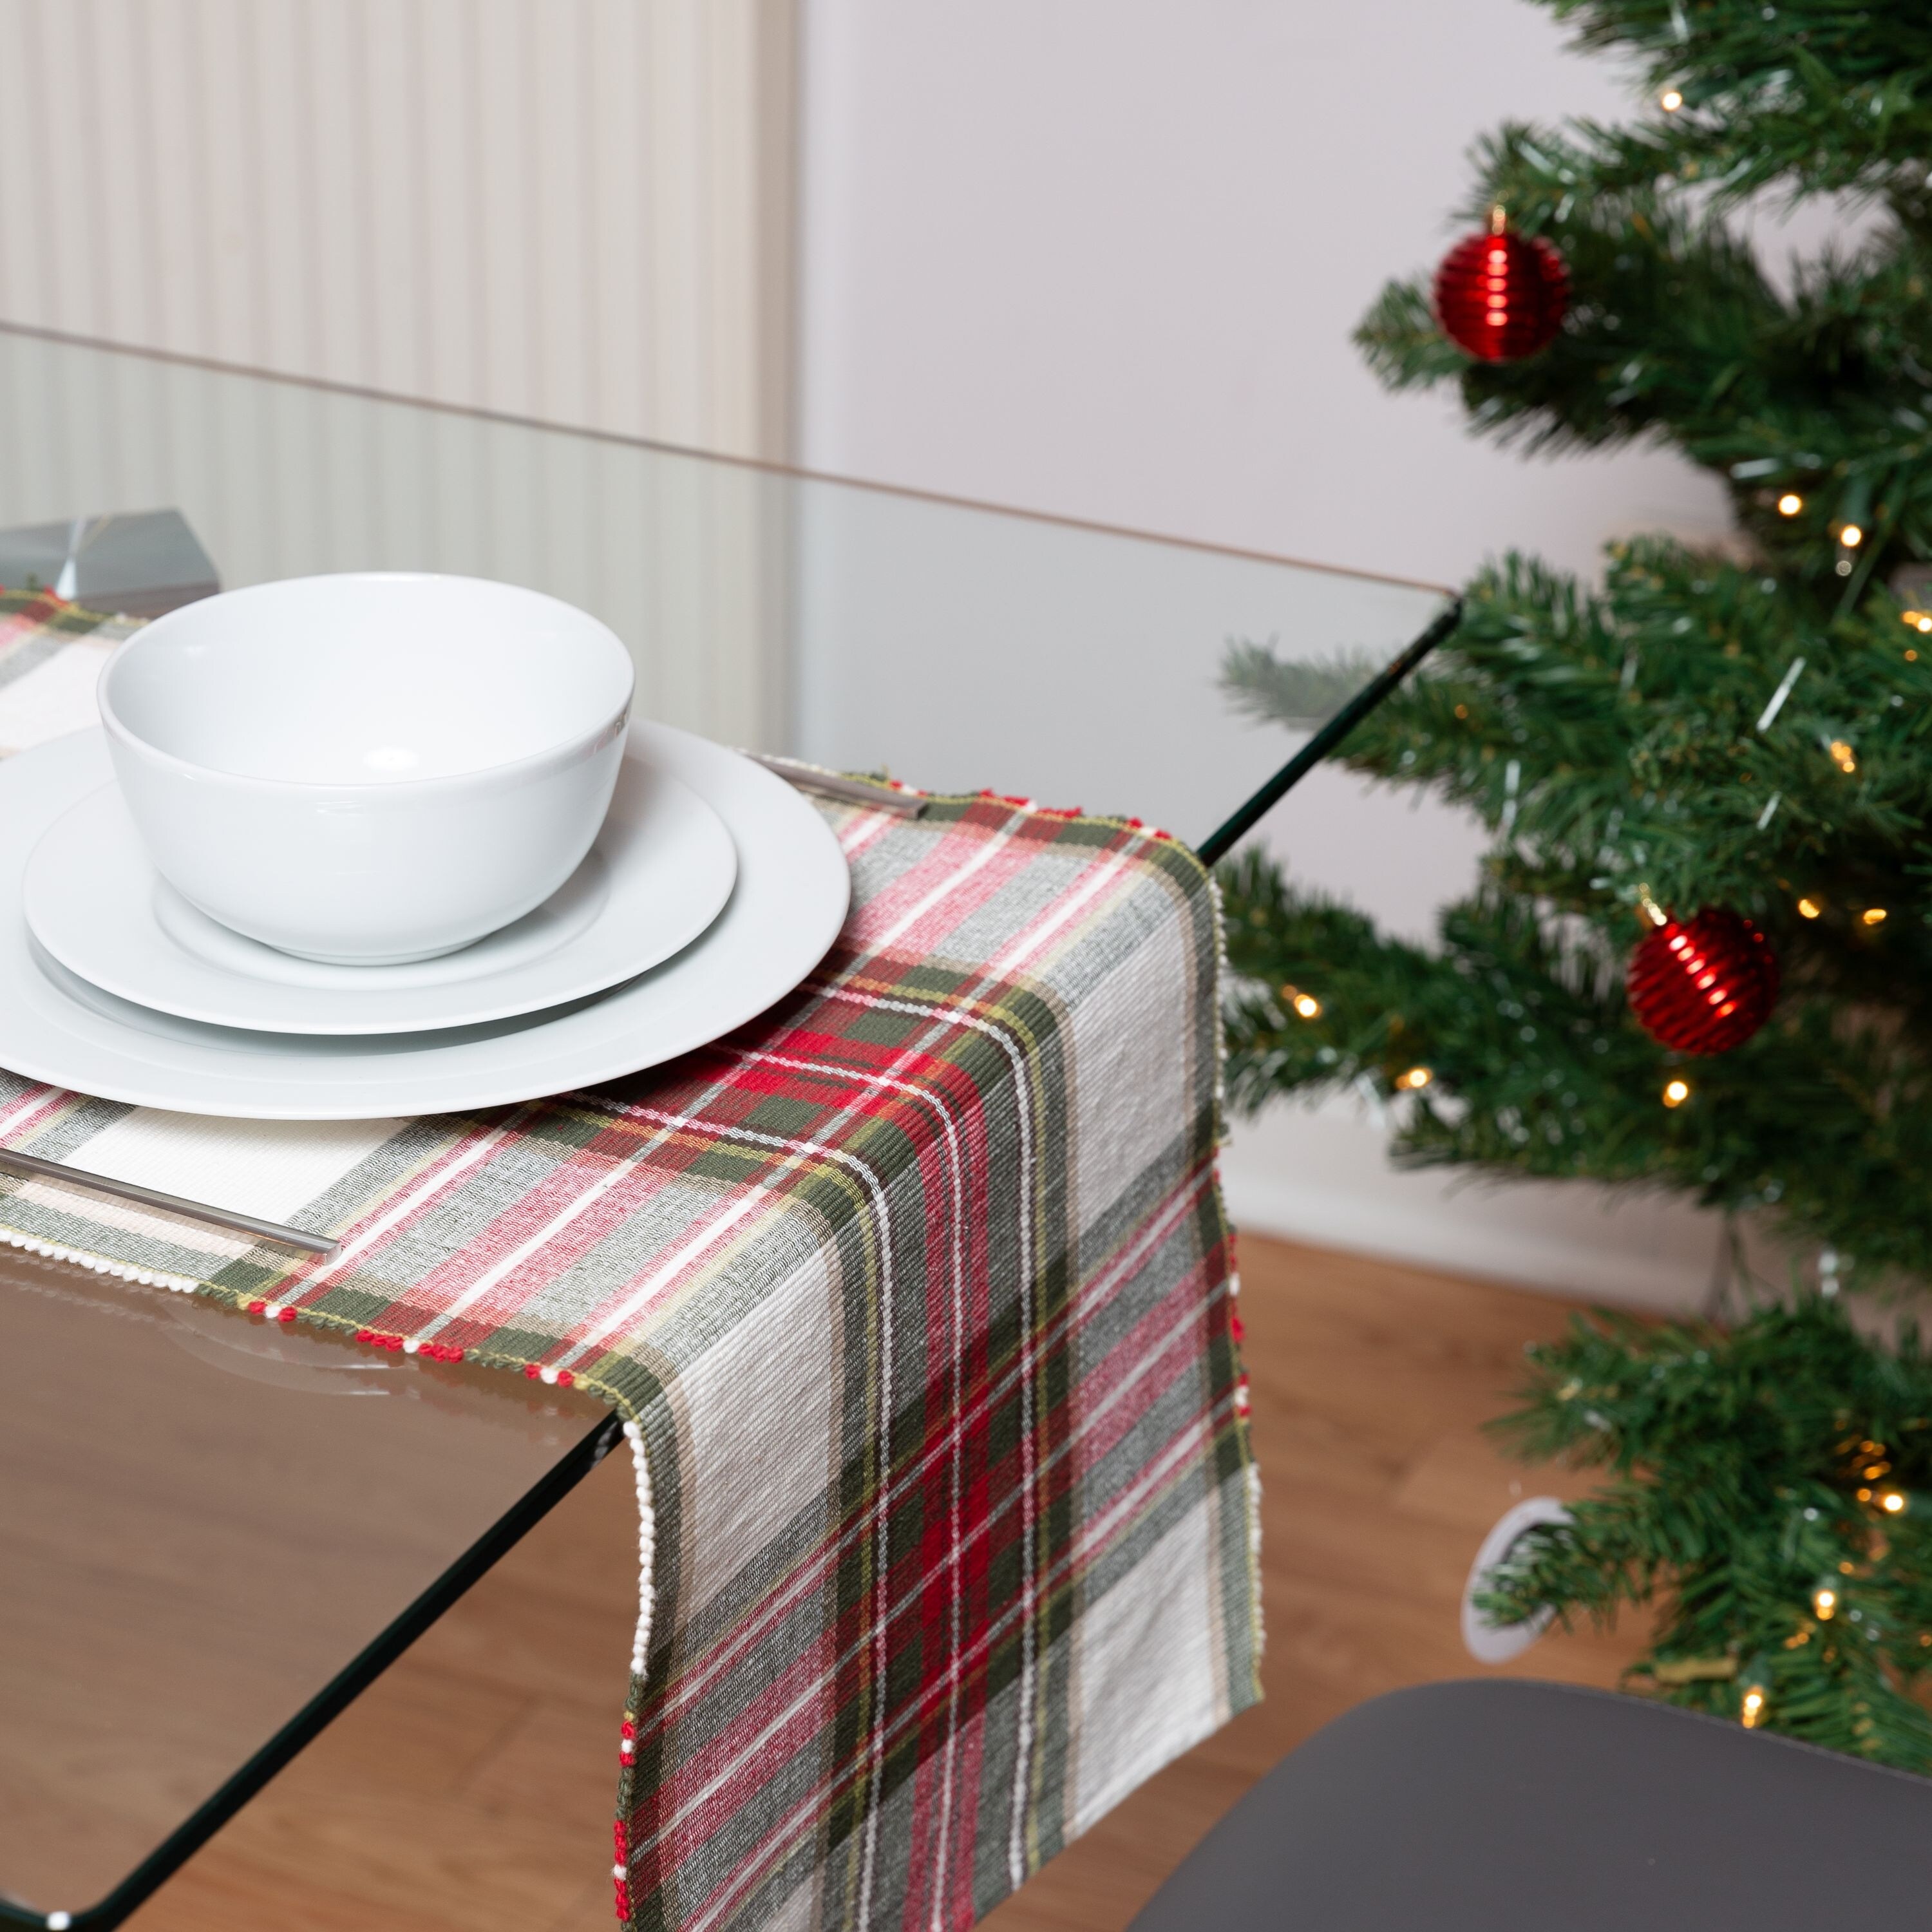 https://ak1.ostkcdn.com/images/products/is/images/direct/796a508a0127914196bfda450fcfd7b2f618432b/Fabstyles-Celebration-Plaid-Cotton-Table-Runner.jpg